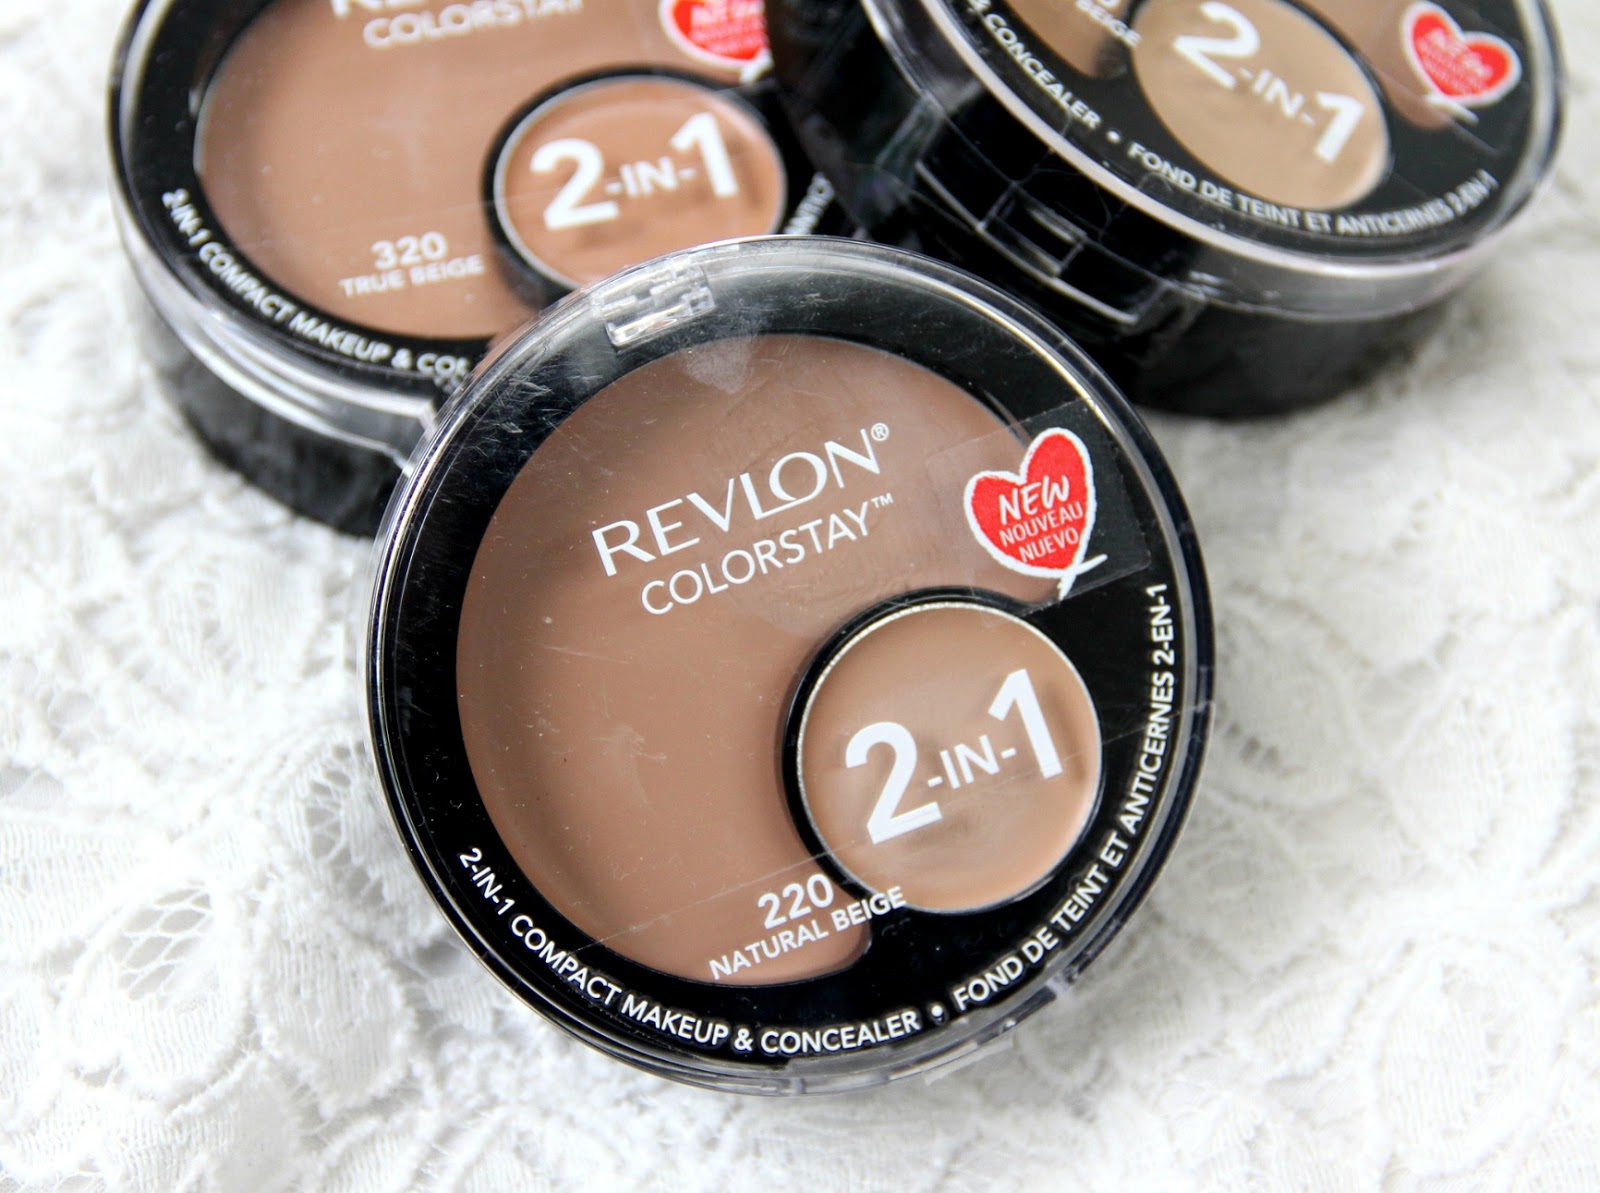 Revlon Colorstay 2 in 1 Compact Review -3 Shades w/Swatches and